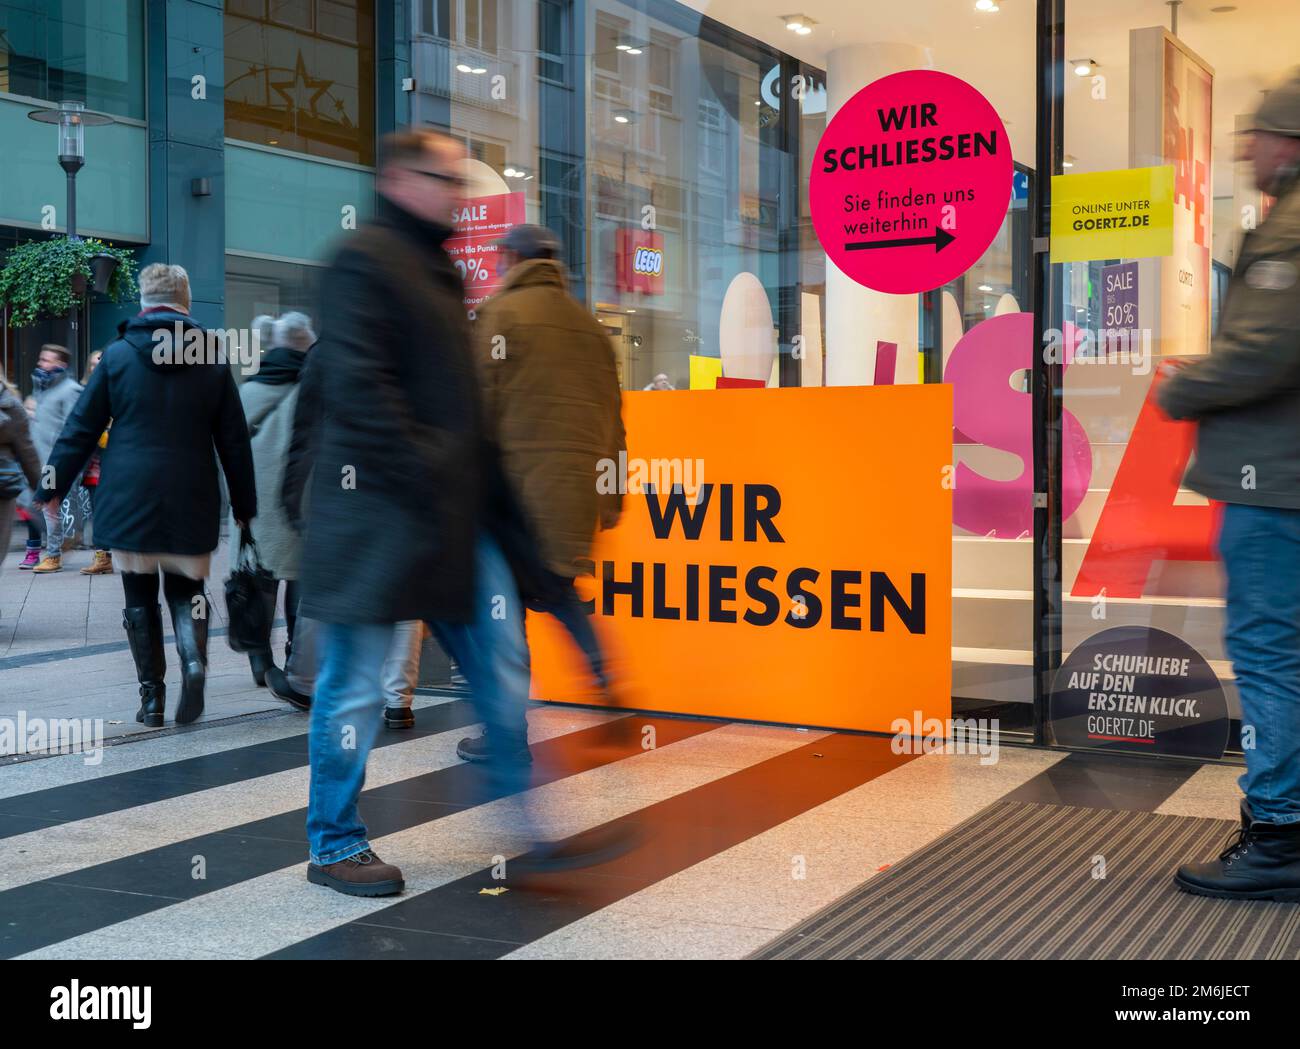 Shopping street, pedestrian zone, shoe shop closing, clearance sale, going out of business, Limbacher Straße, Essen, NRW, Germany, Stock Photo